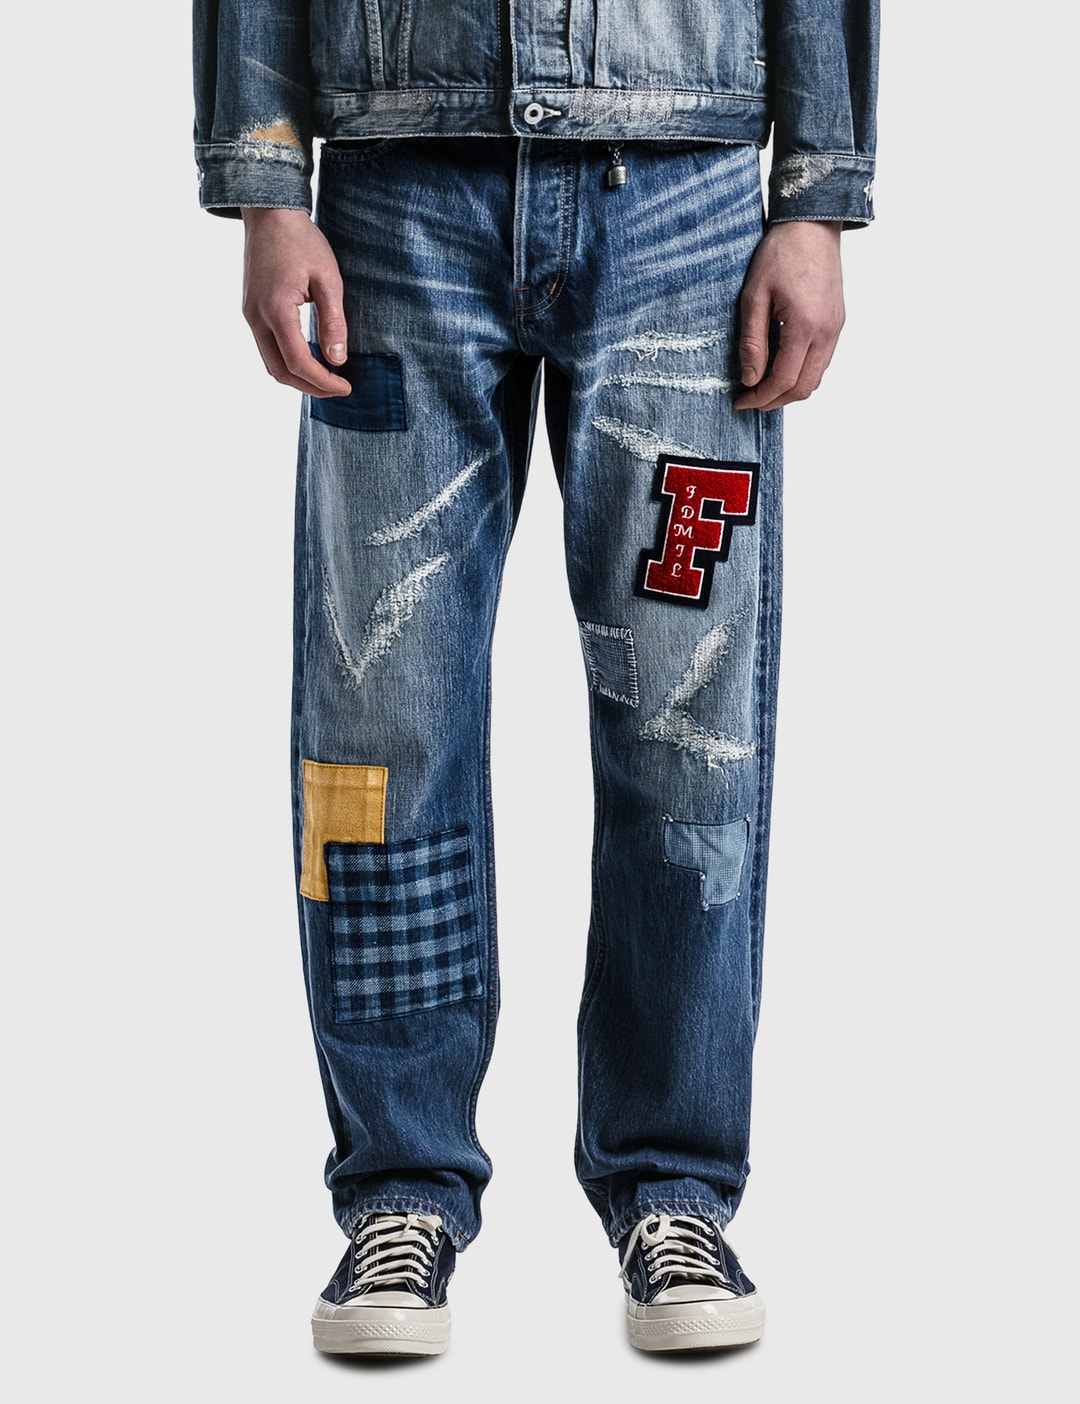 FDMTL - CLASSIC STRAIGHT DENIM | HBX - Globally Curated Fashion and ...